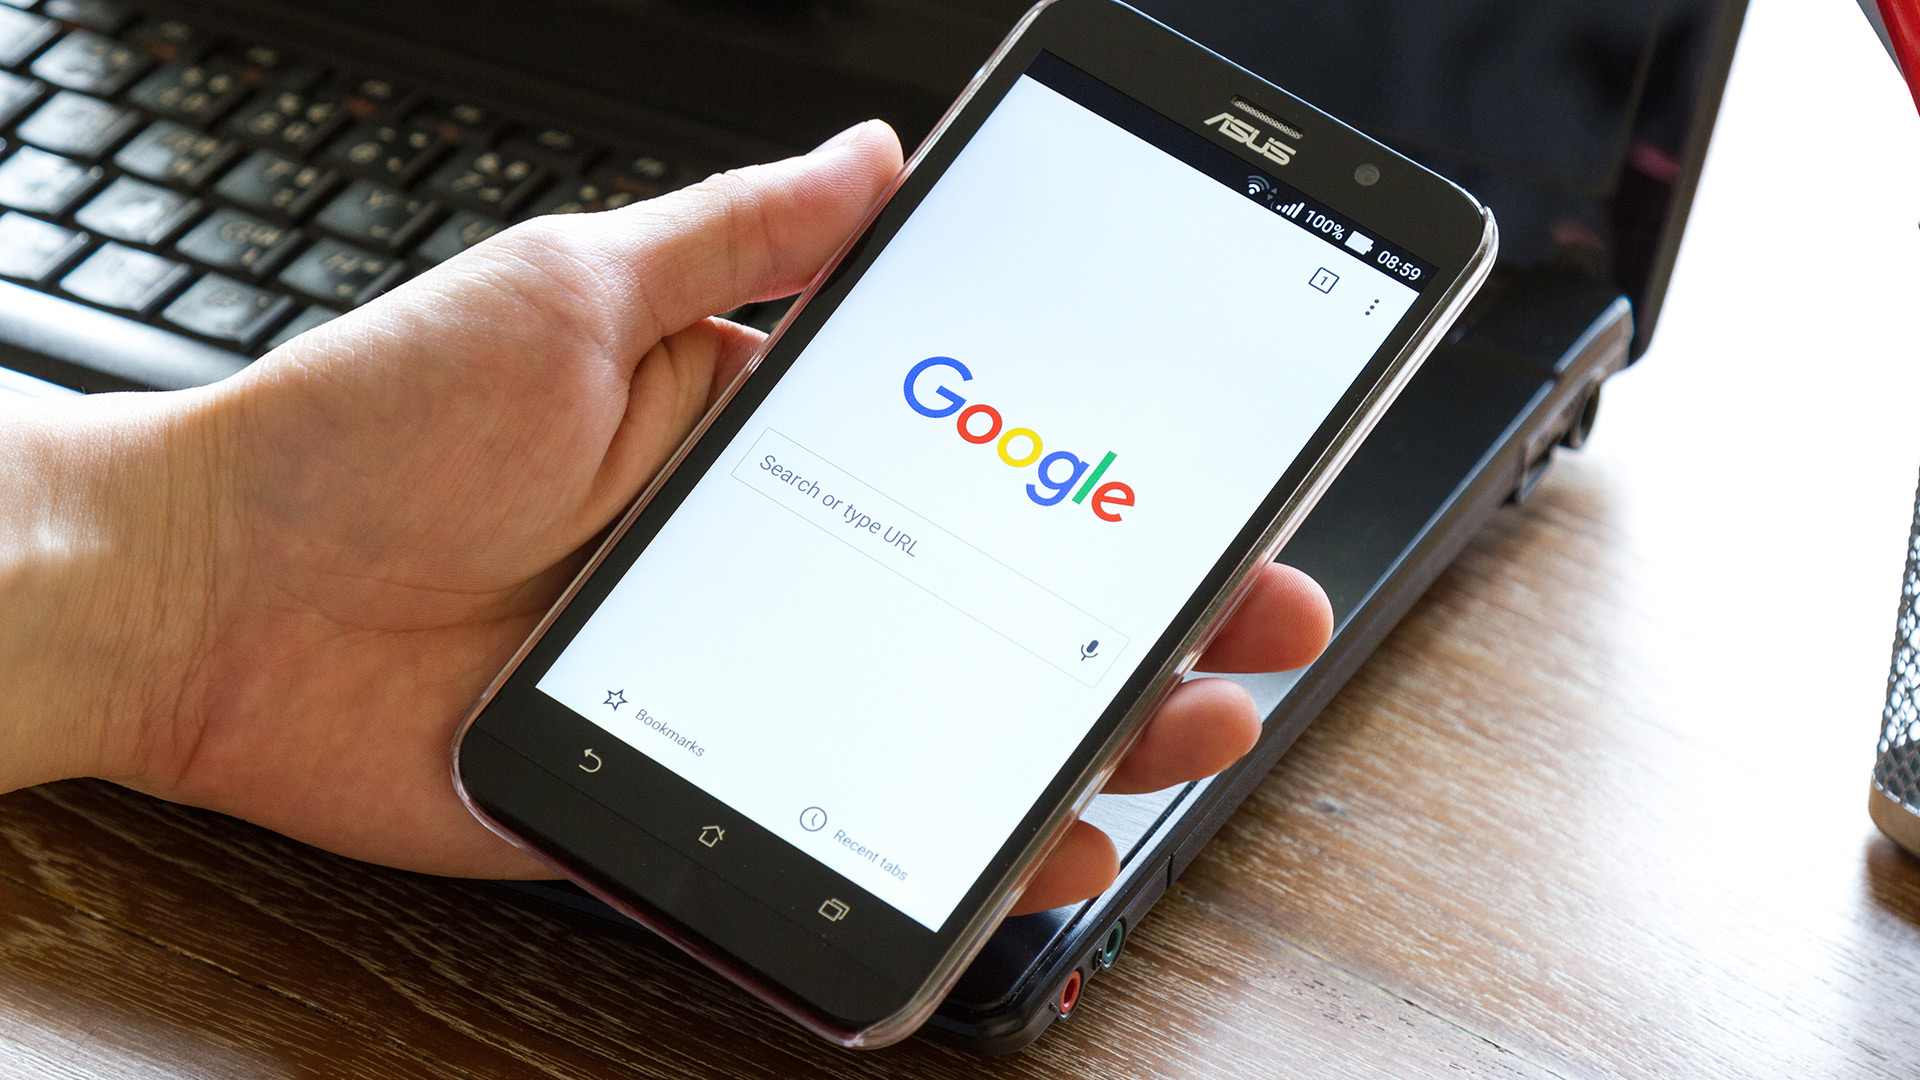 Google’s shift to mobile-first: mobile moments that matter - Kashin / Shutterstock.com